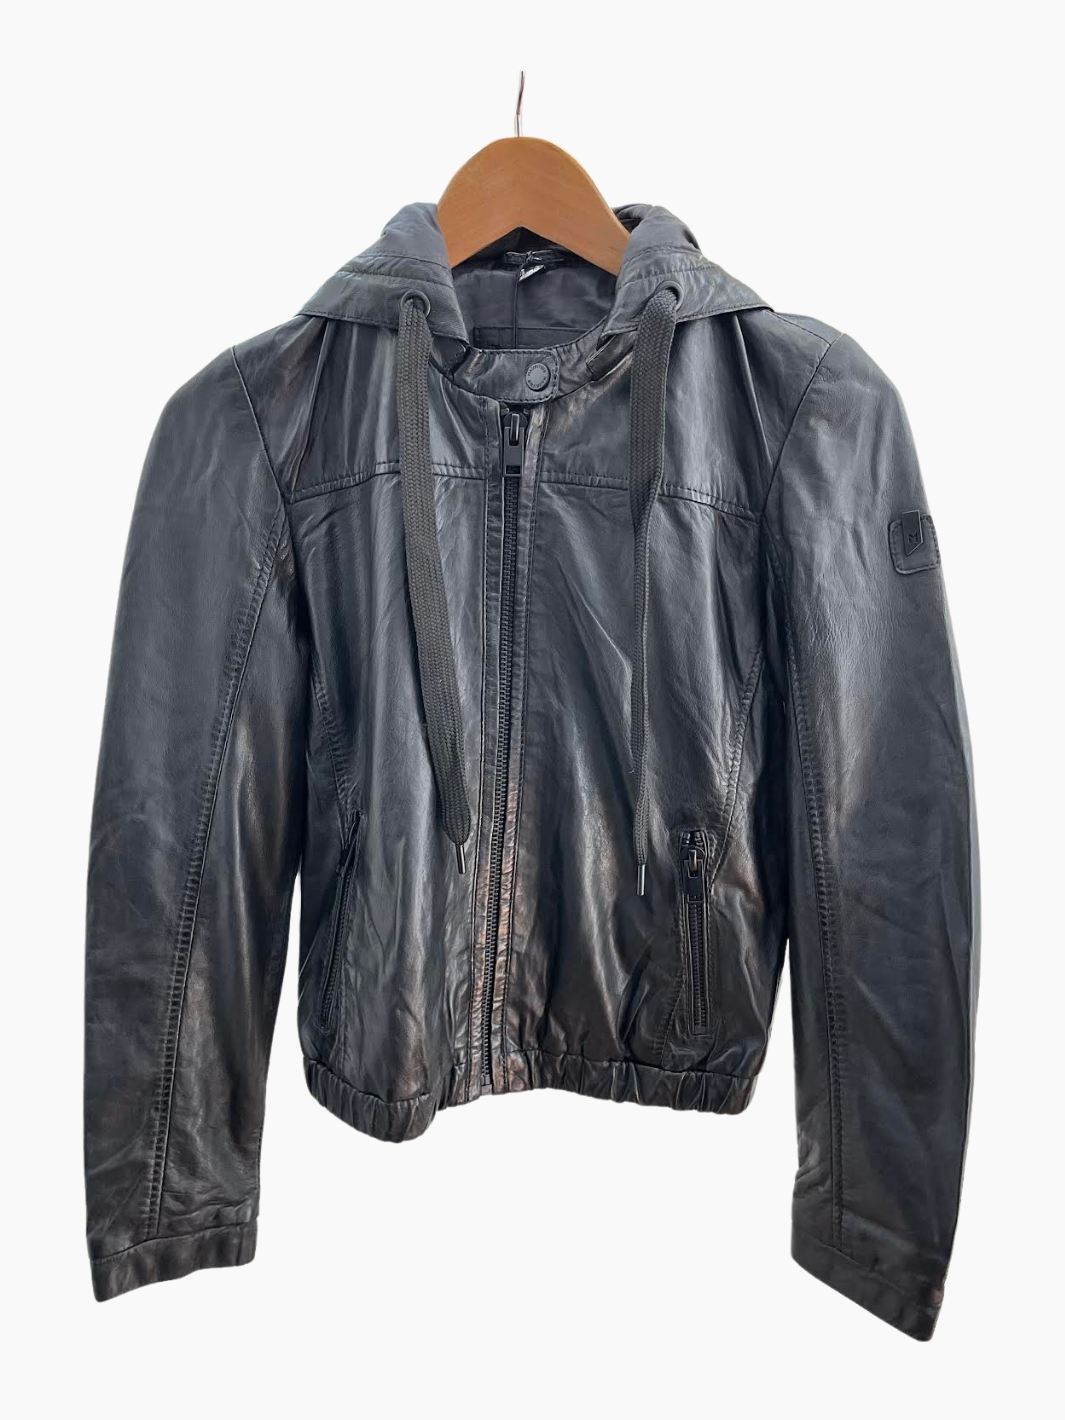 MAEV RF LEATHER JACKET IN BLACK - Romi Boutique